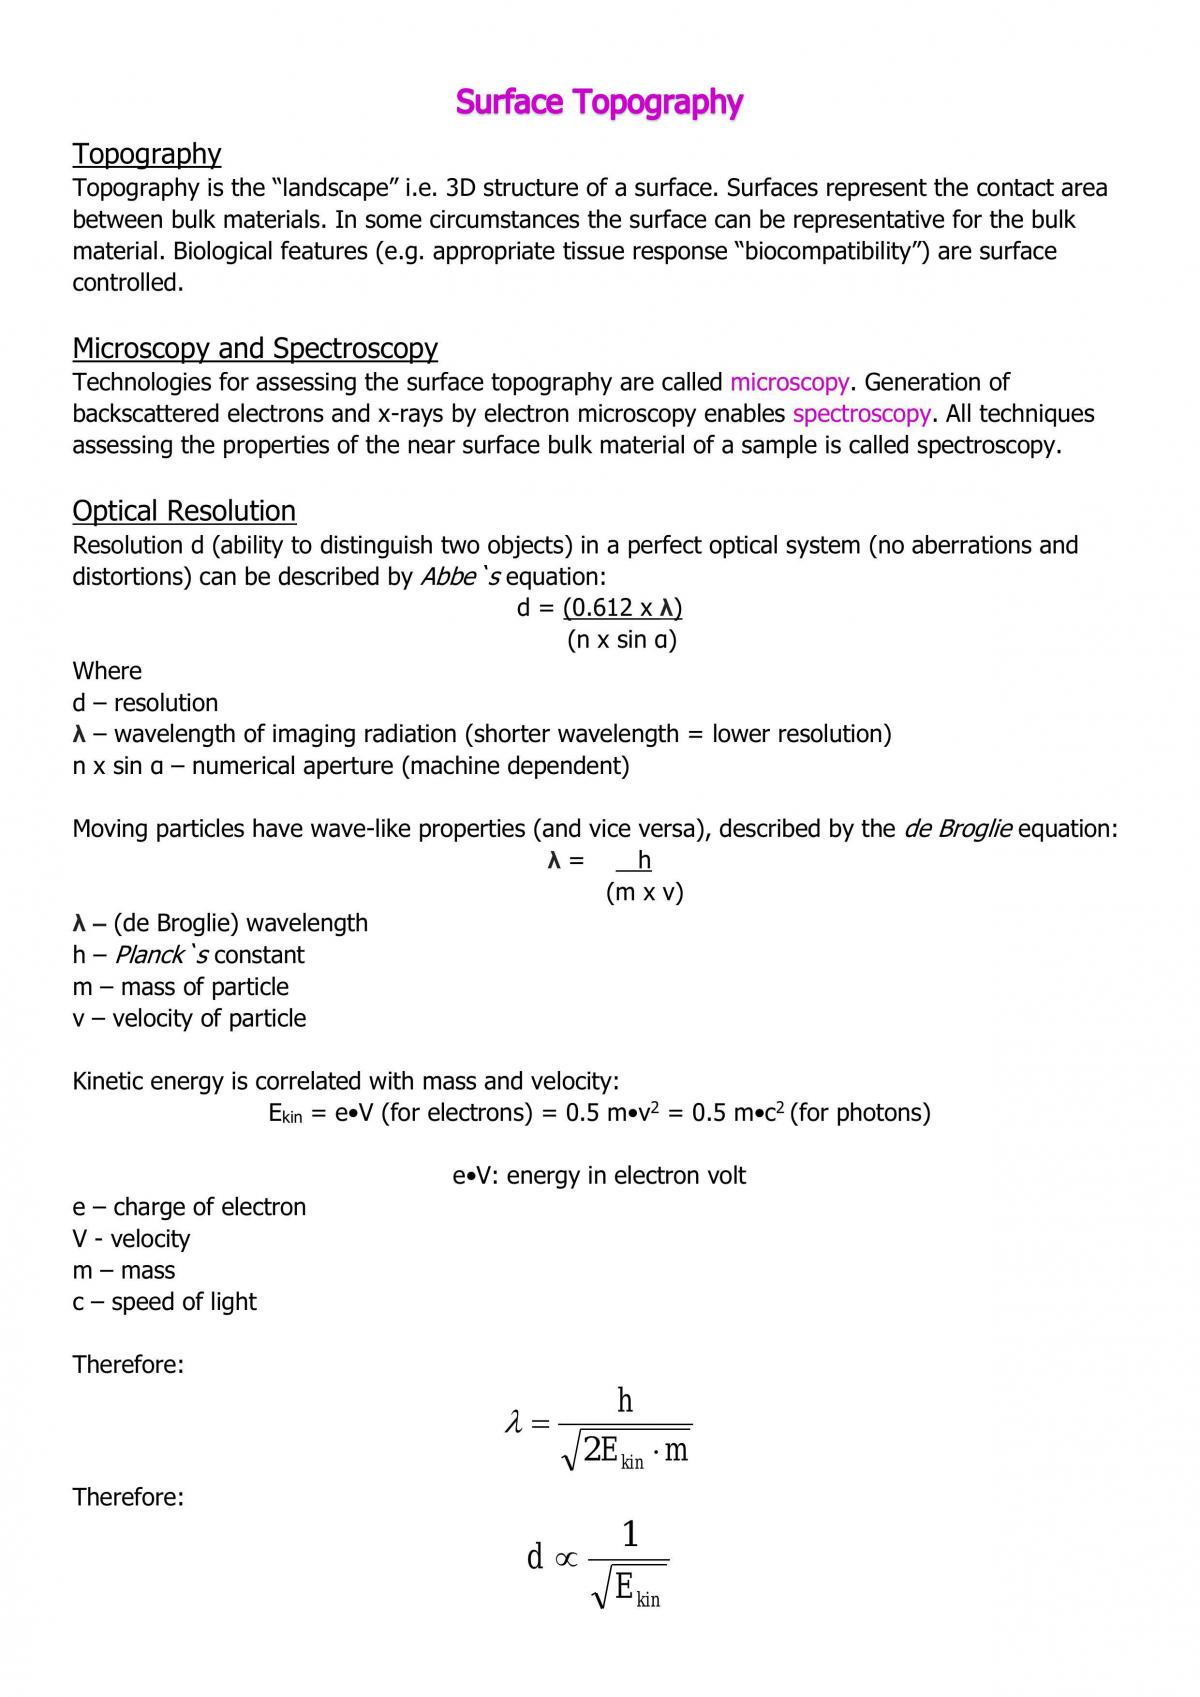 Laboratory Assessment of Biomaterials Module Notes - Page 3